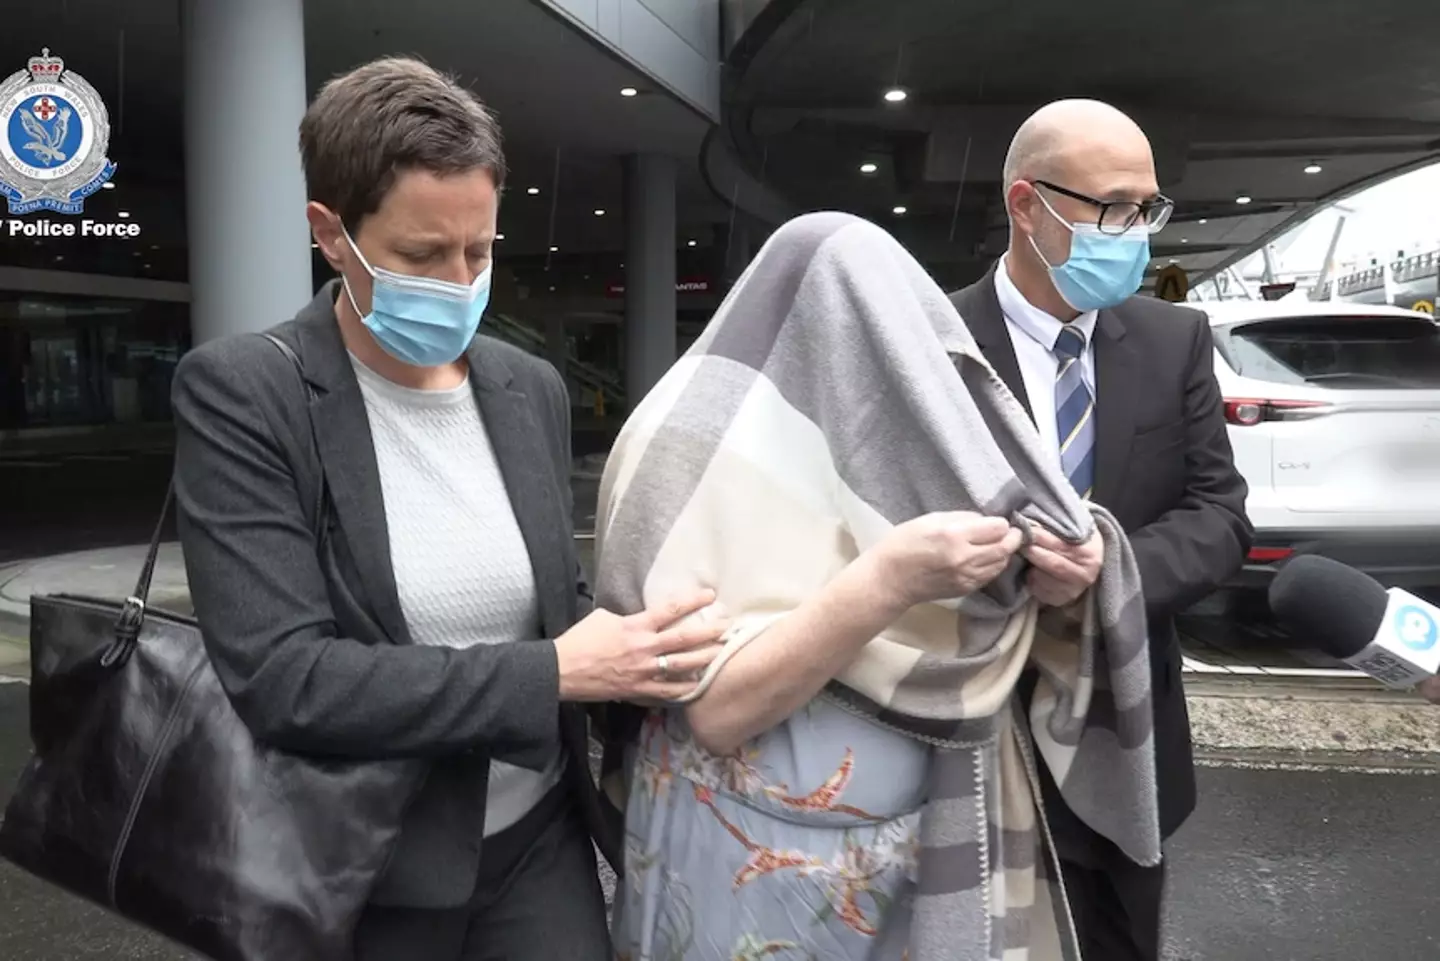 The woman was extradited to Sydney escorted by police officers (NSW Police)